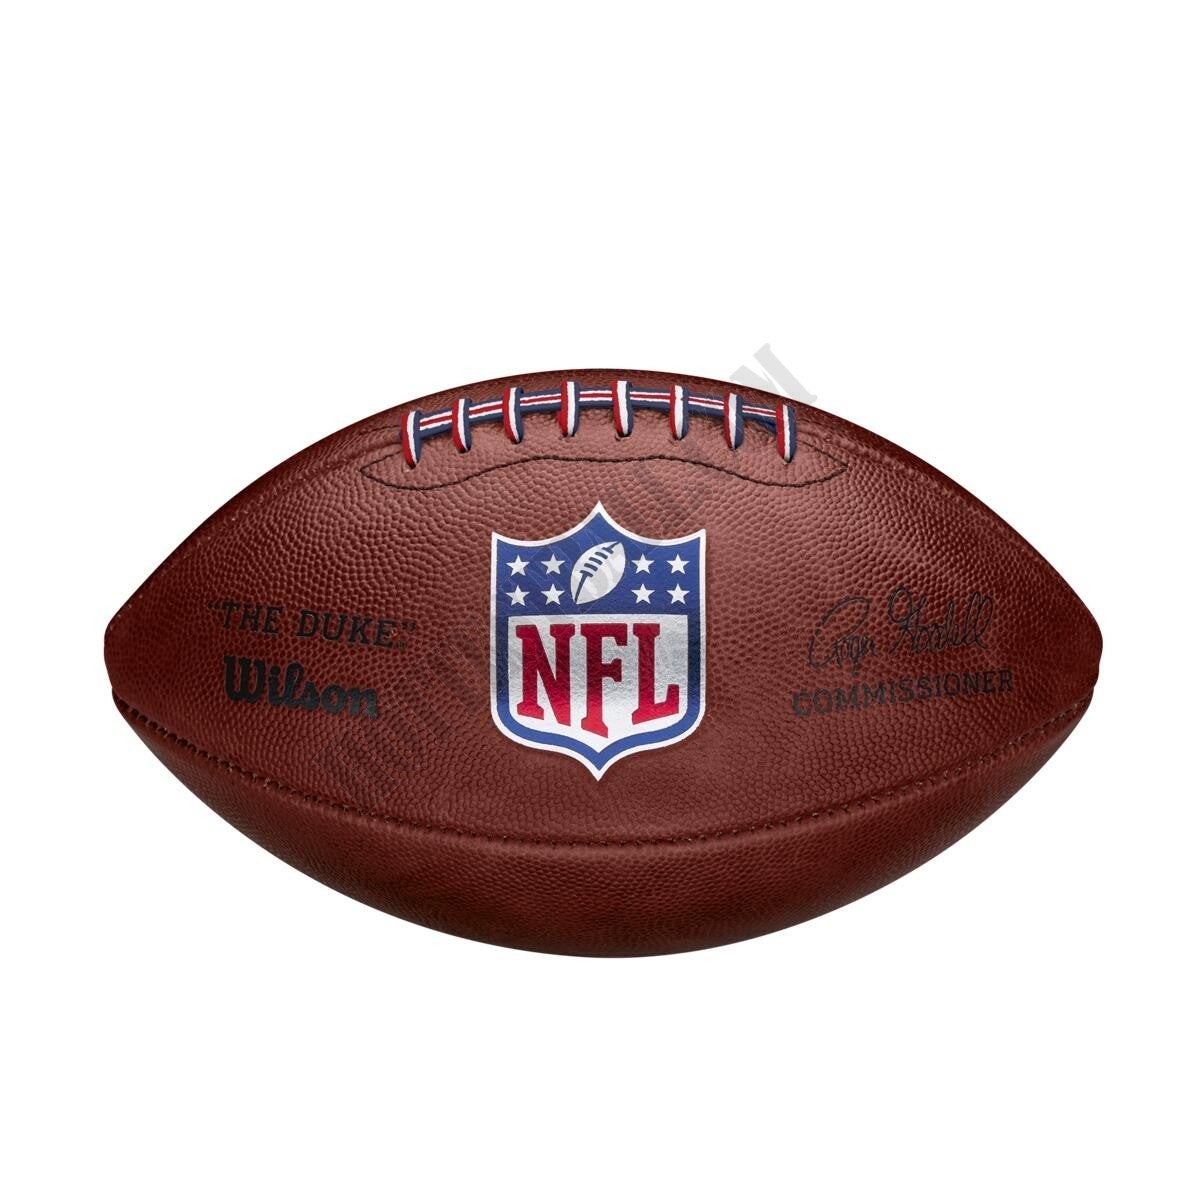 The Duke NFL Football Limited Edition - Wilson Discount Store - -0